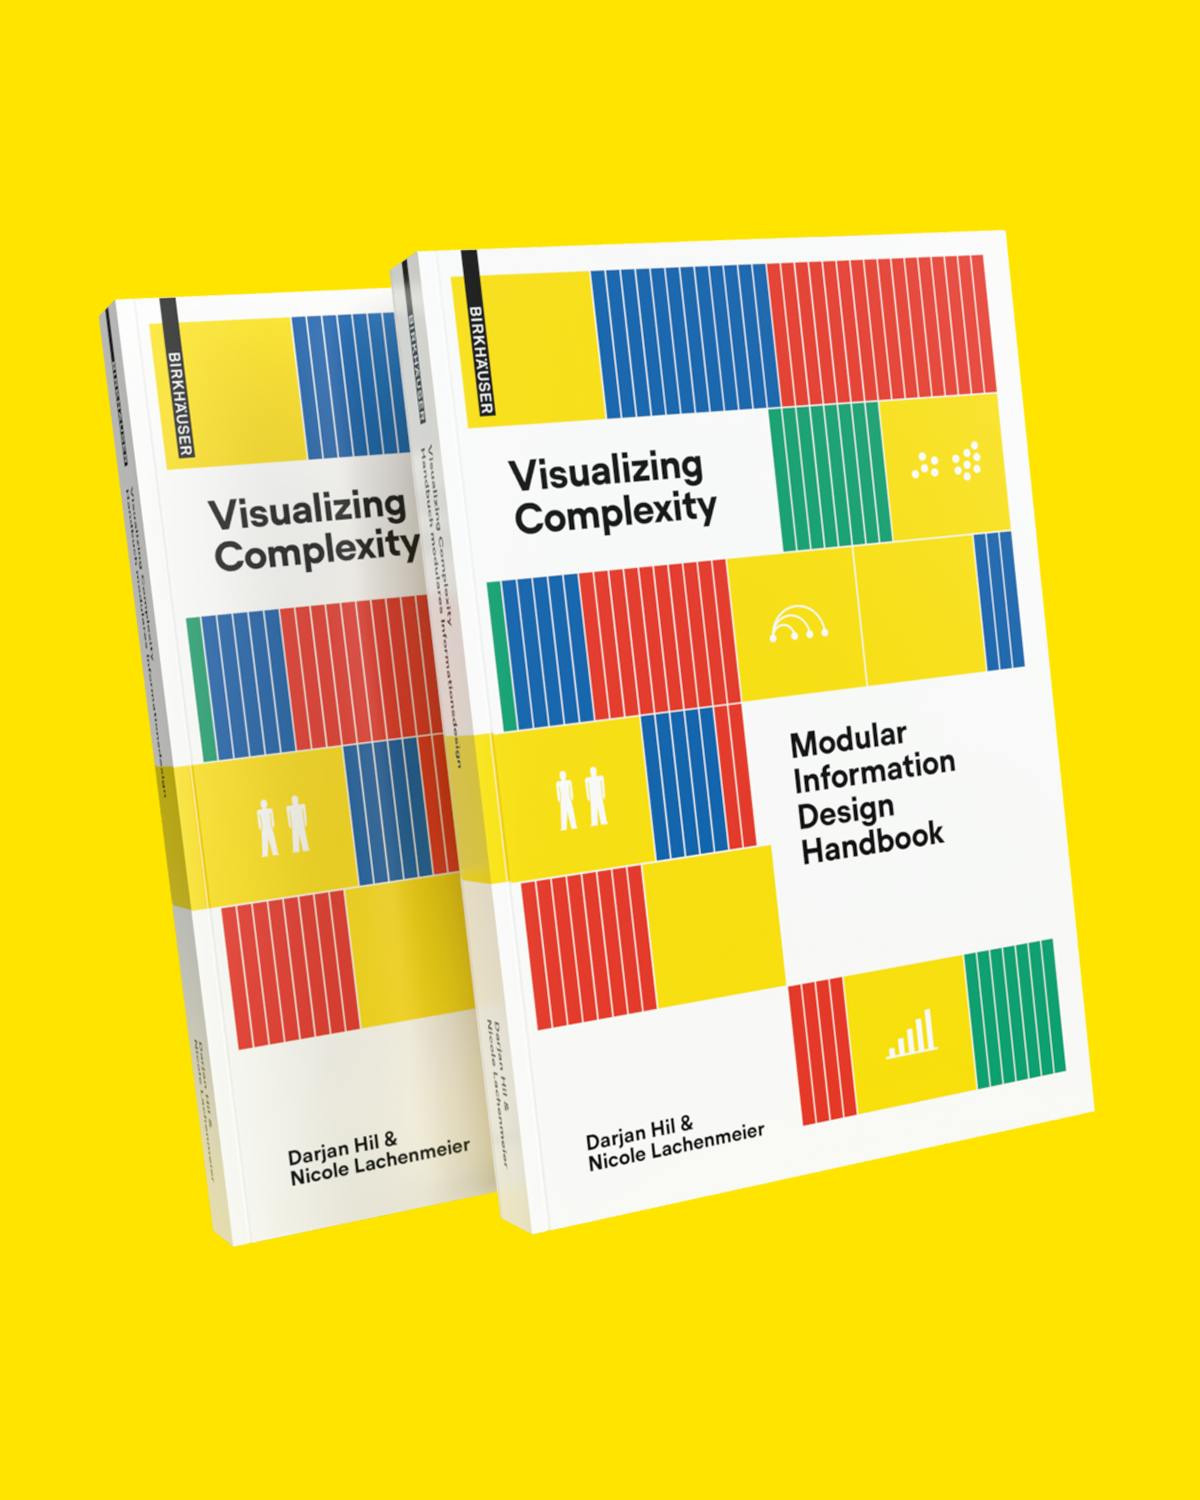 Book cover of "Visualizing complexity – Modular Information Design Handbook" by Superdot Studio